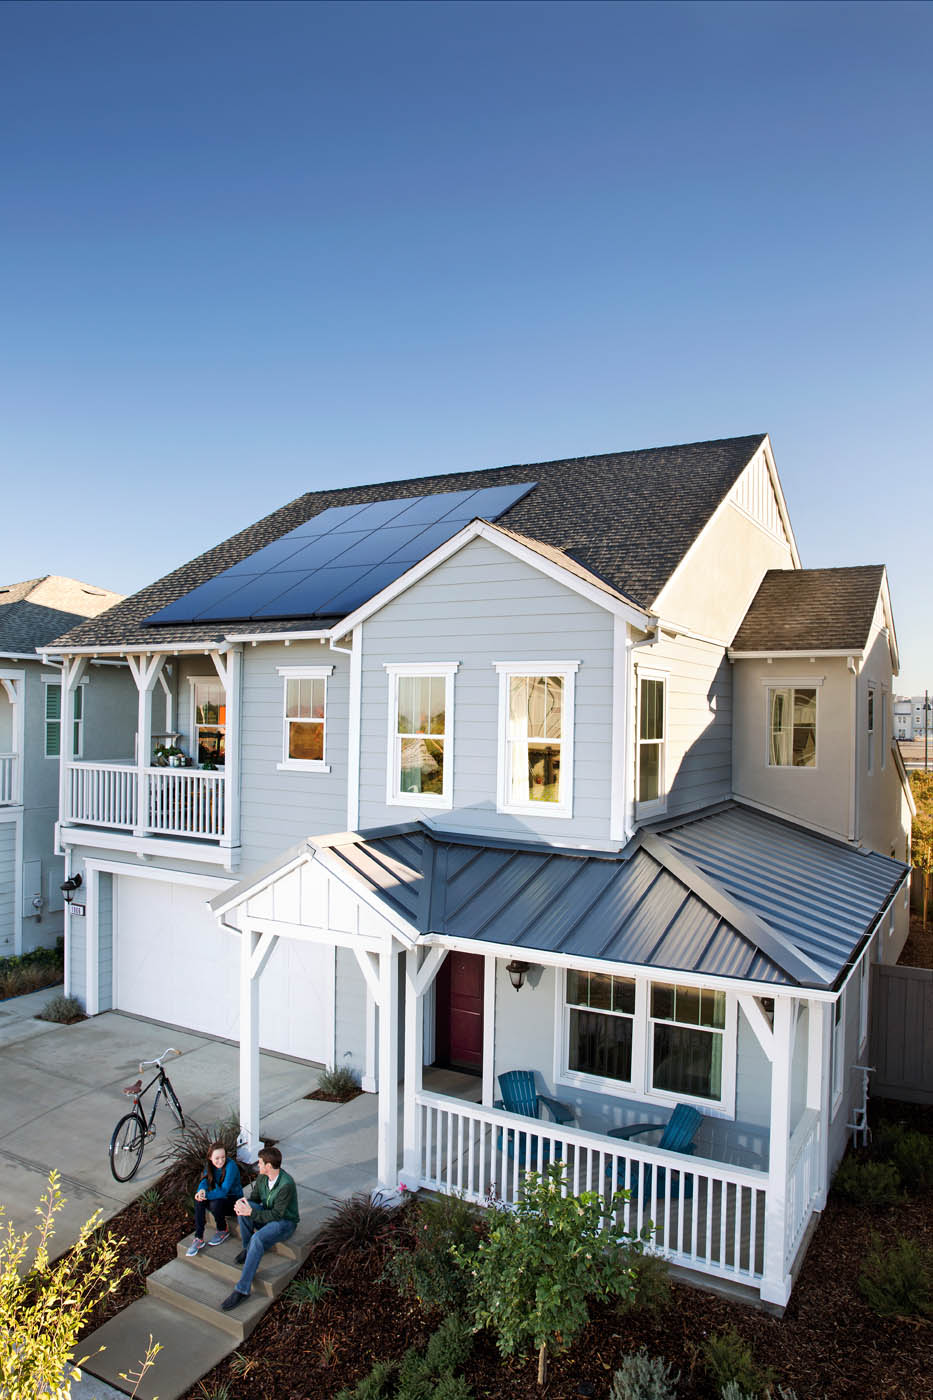 A white house with front contact panels on the roof, provided by SunPower installers in SC & GA.